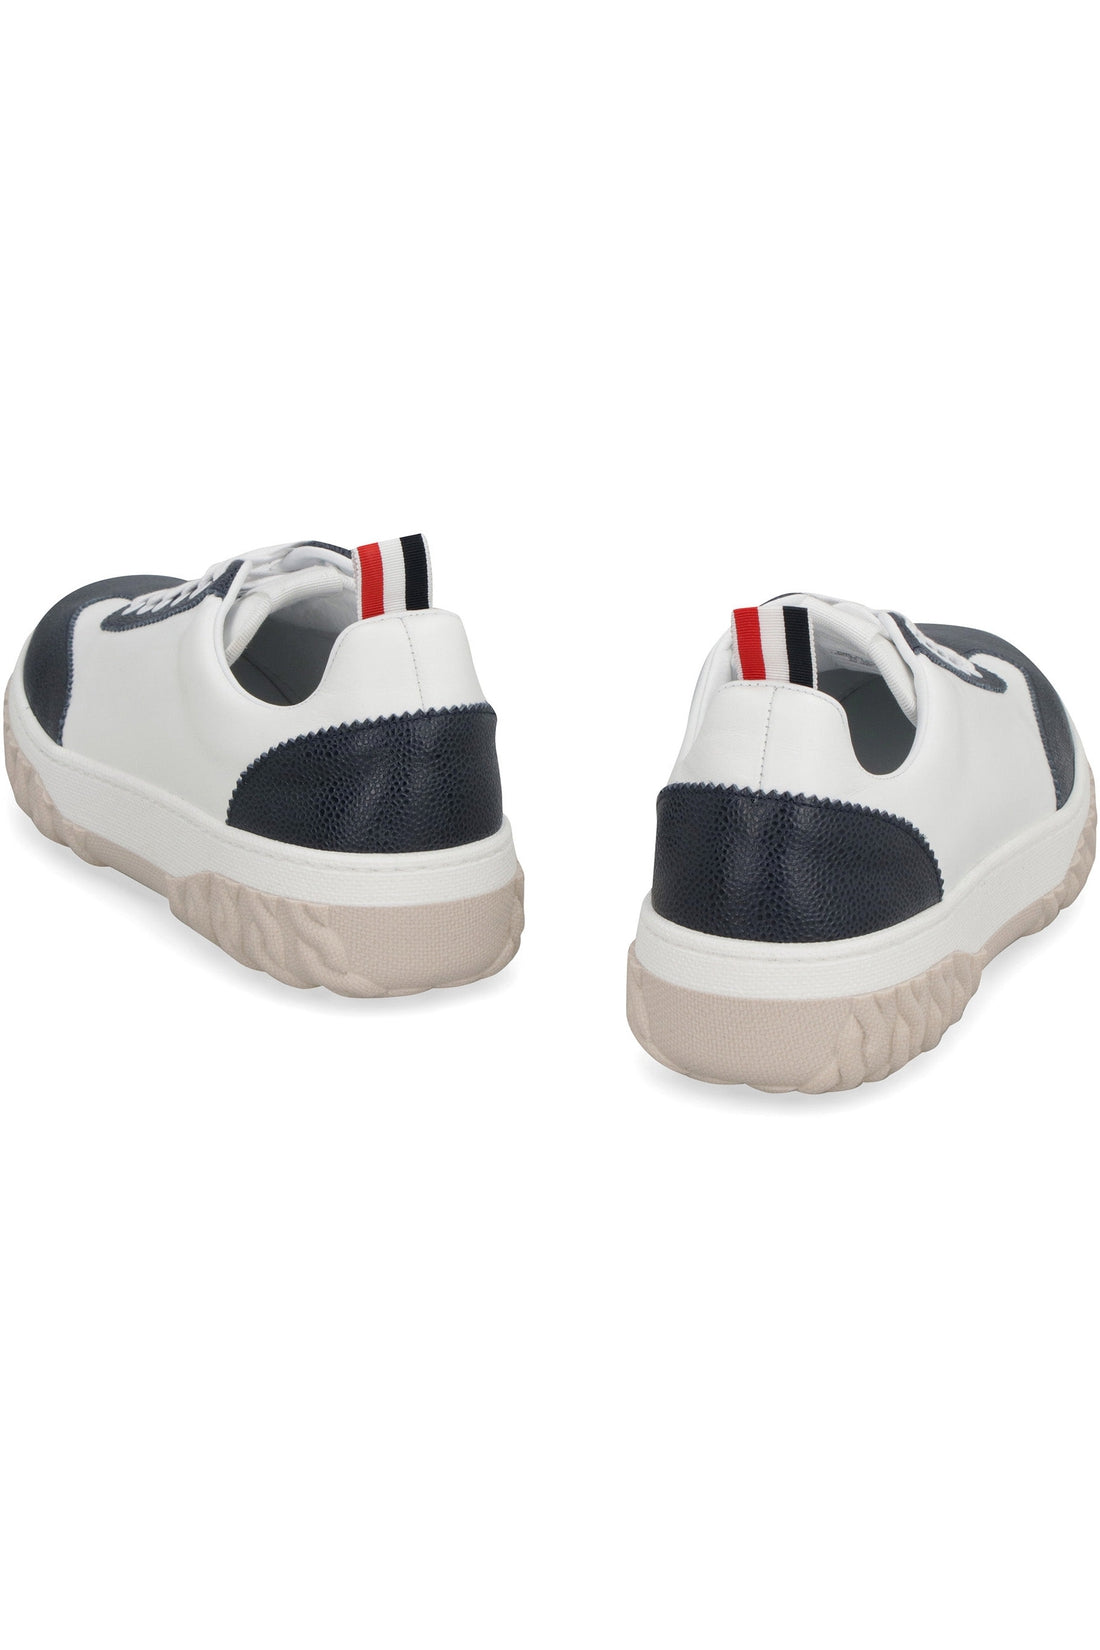 Thom Browne-OUTLET-SALE-Court leather low-top sneakers-ARCHIVIST